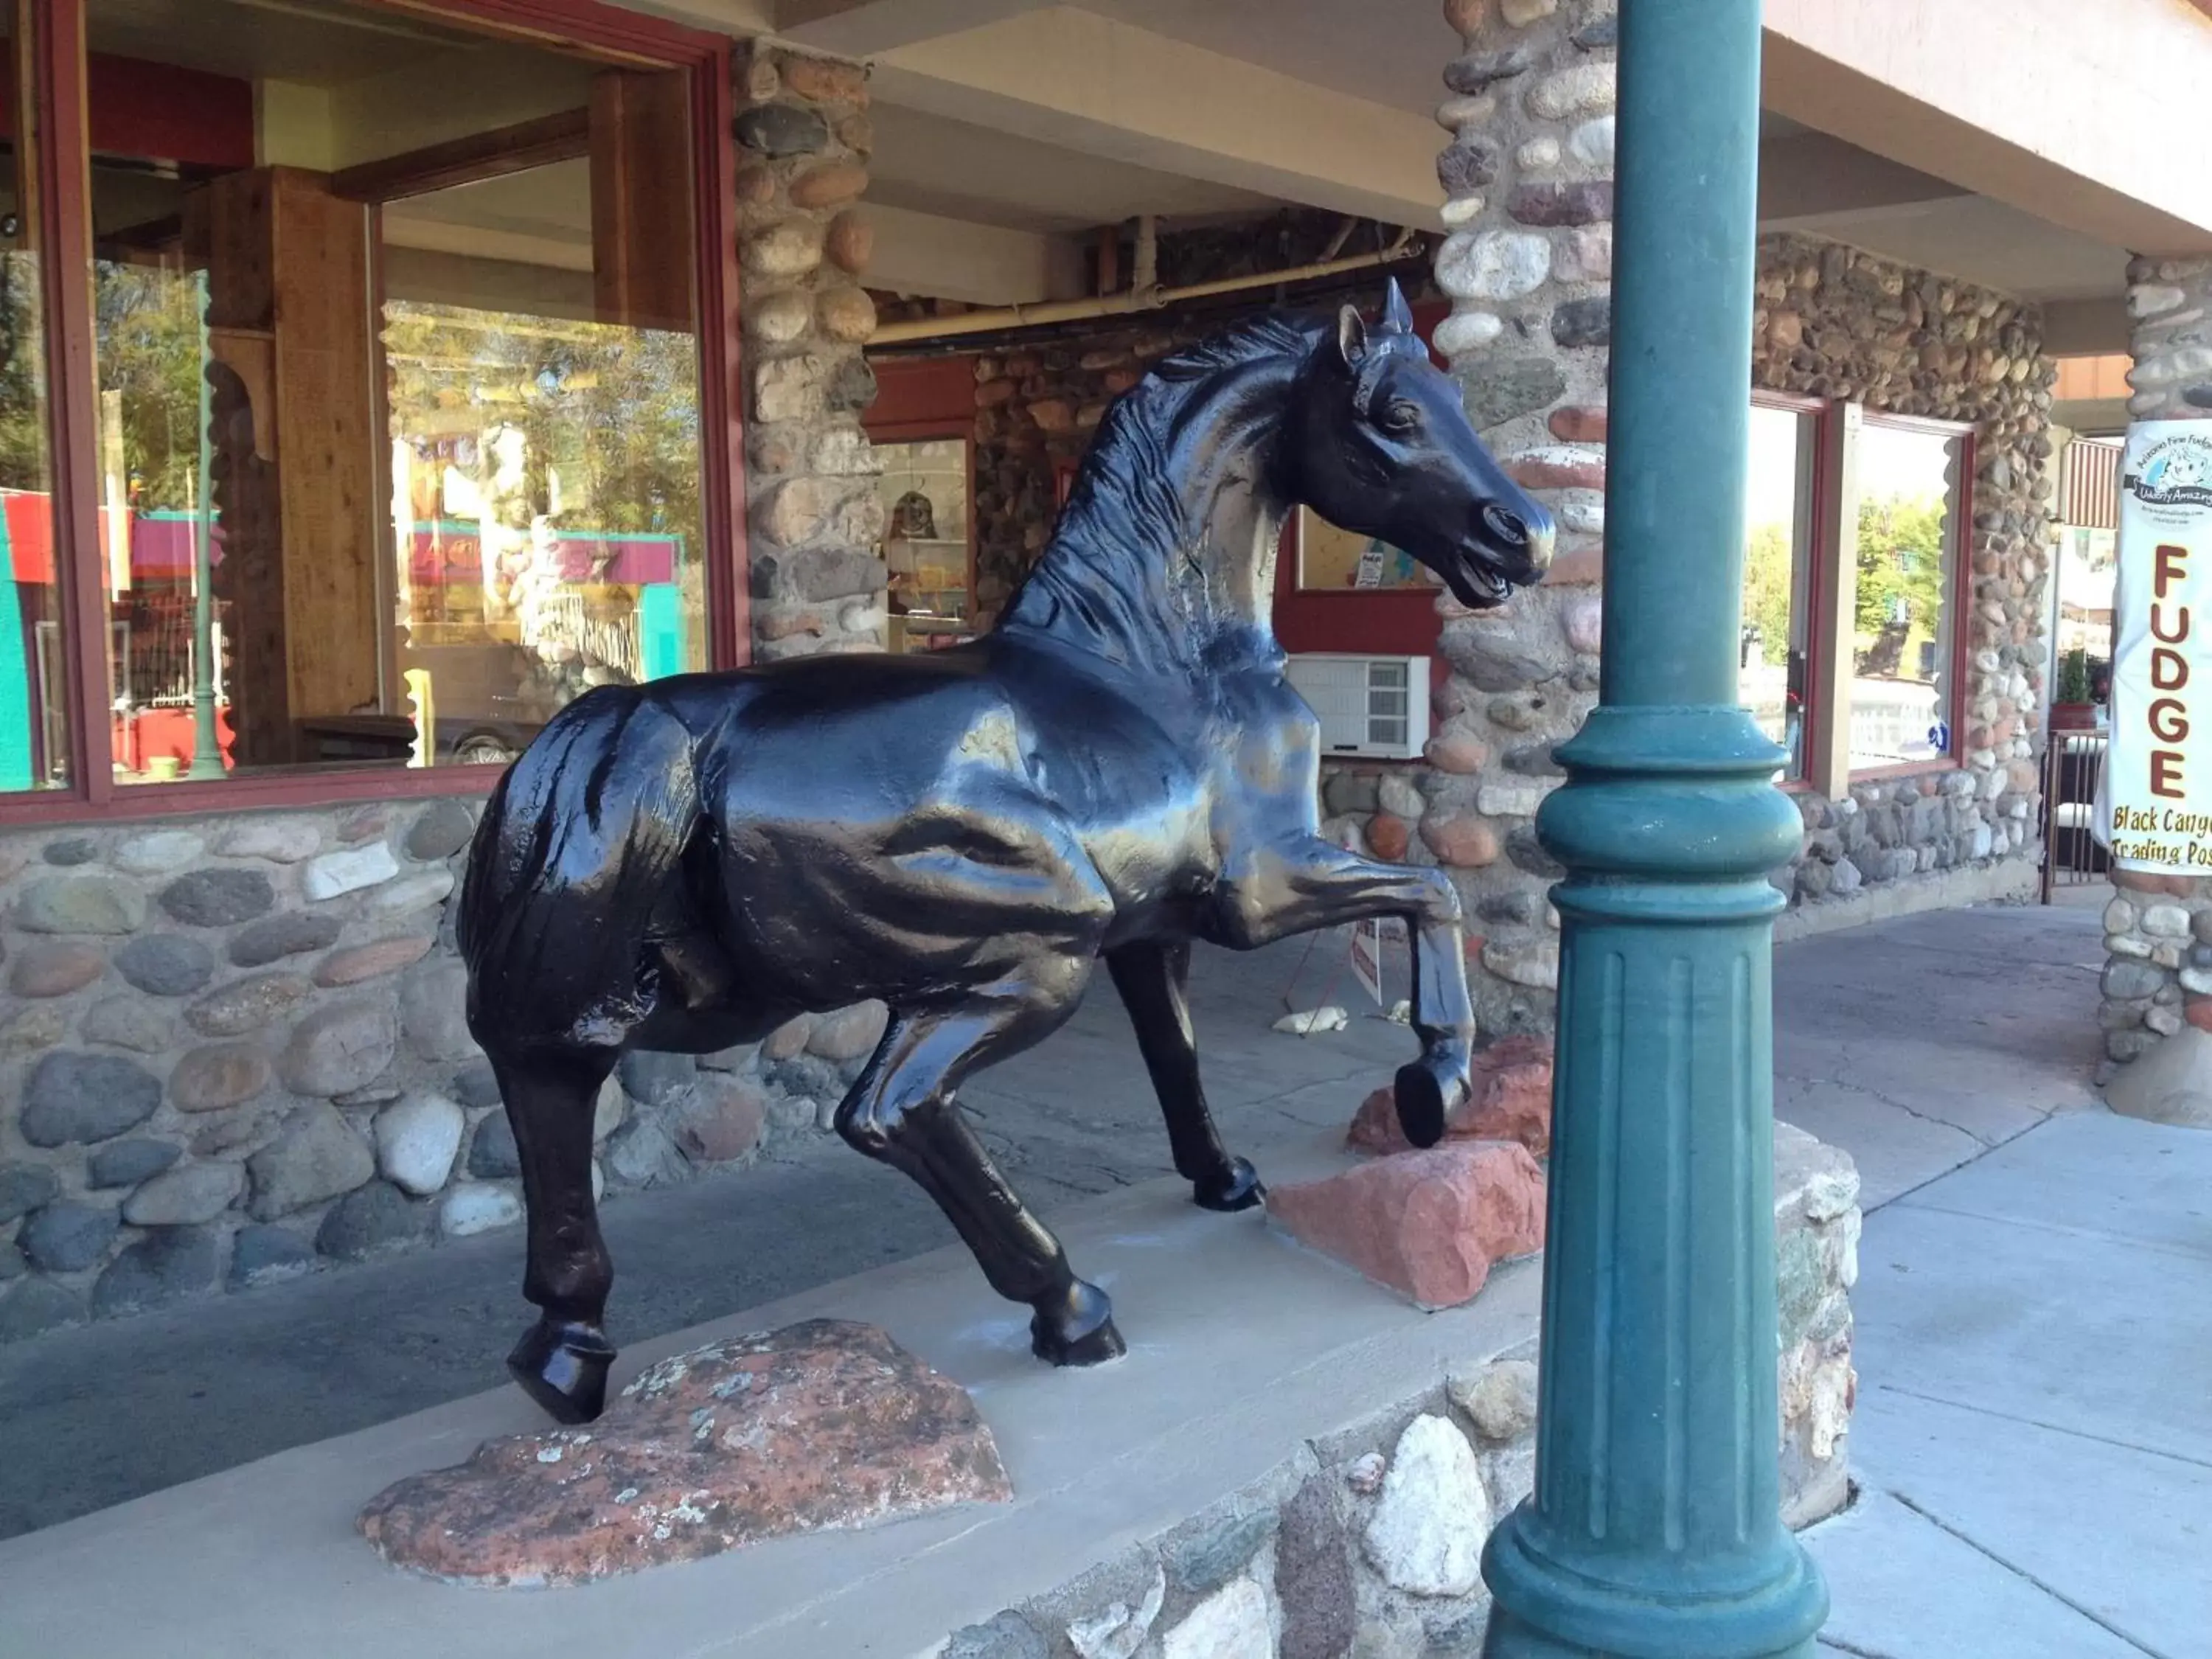 Property building, Other Animals in Iron Horse Inn